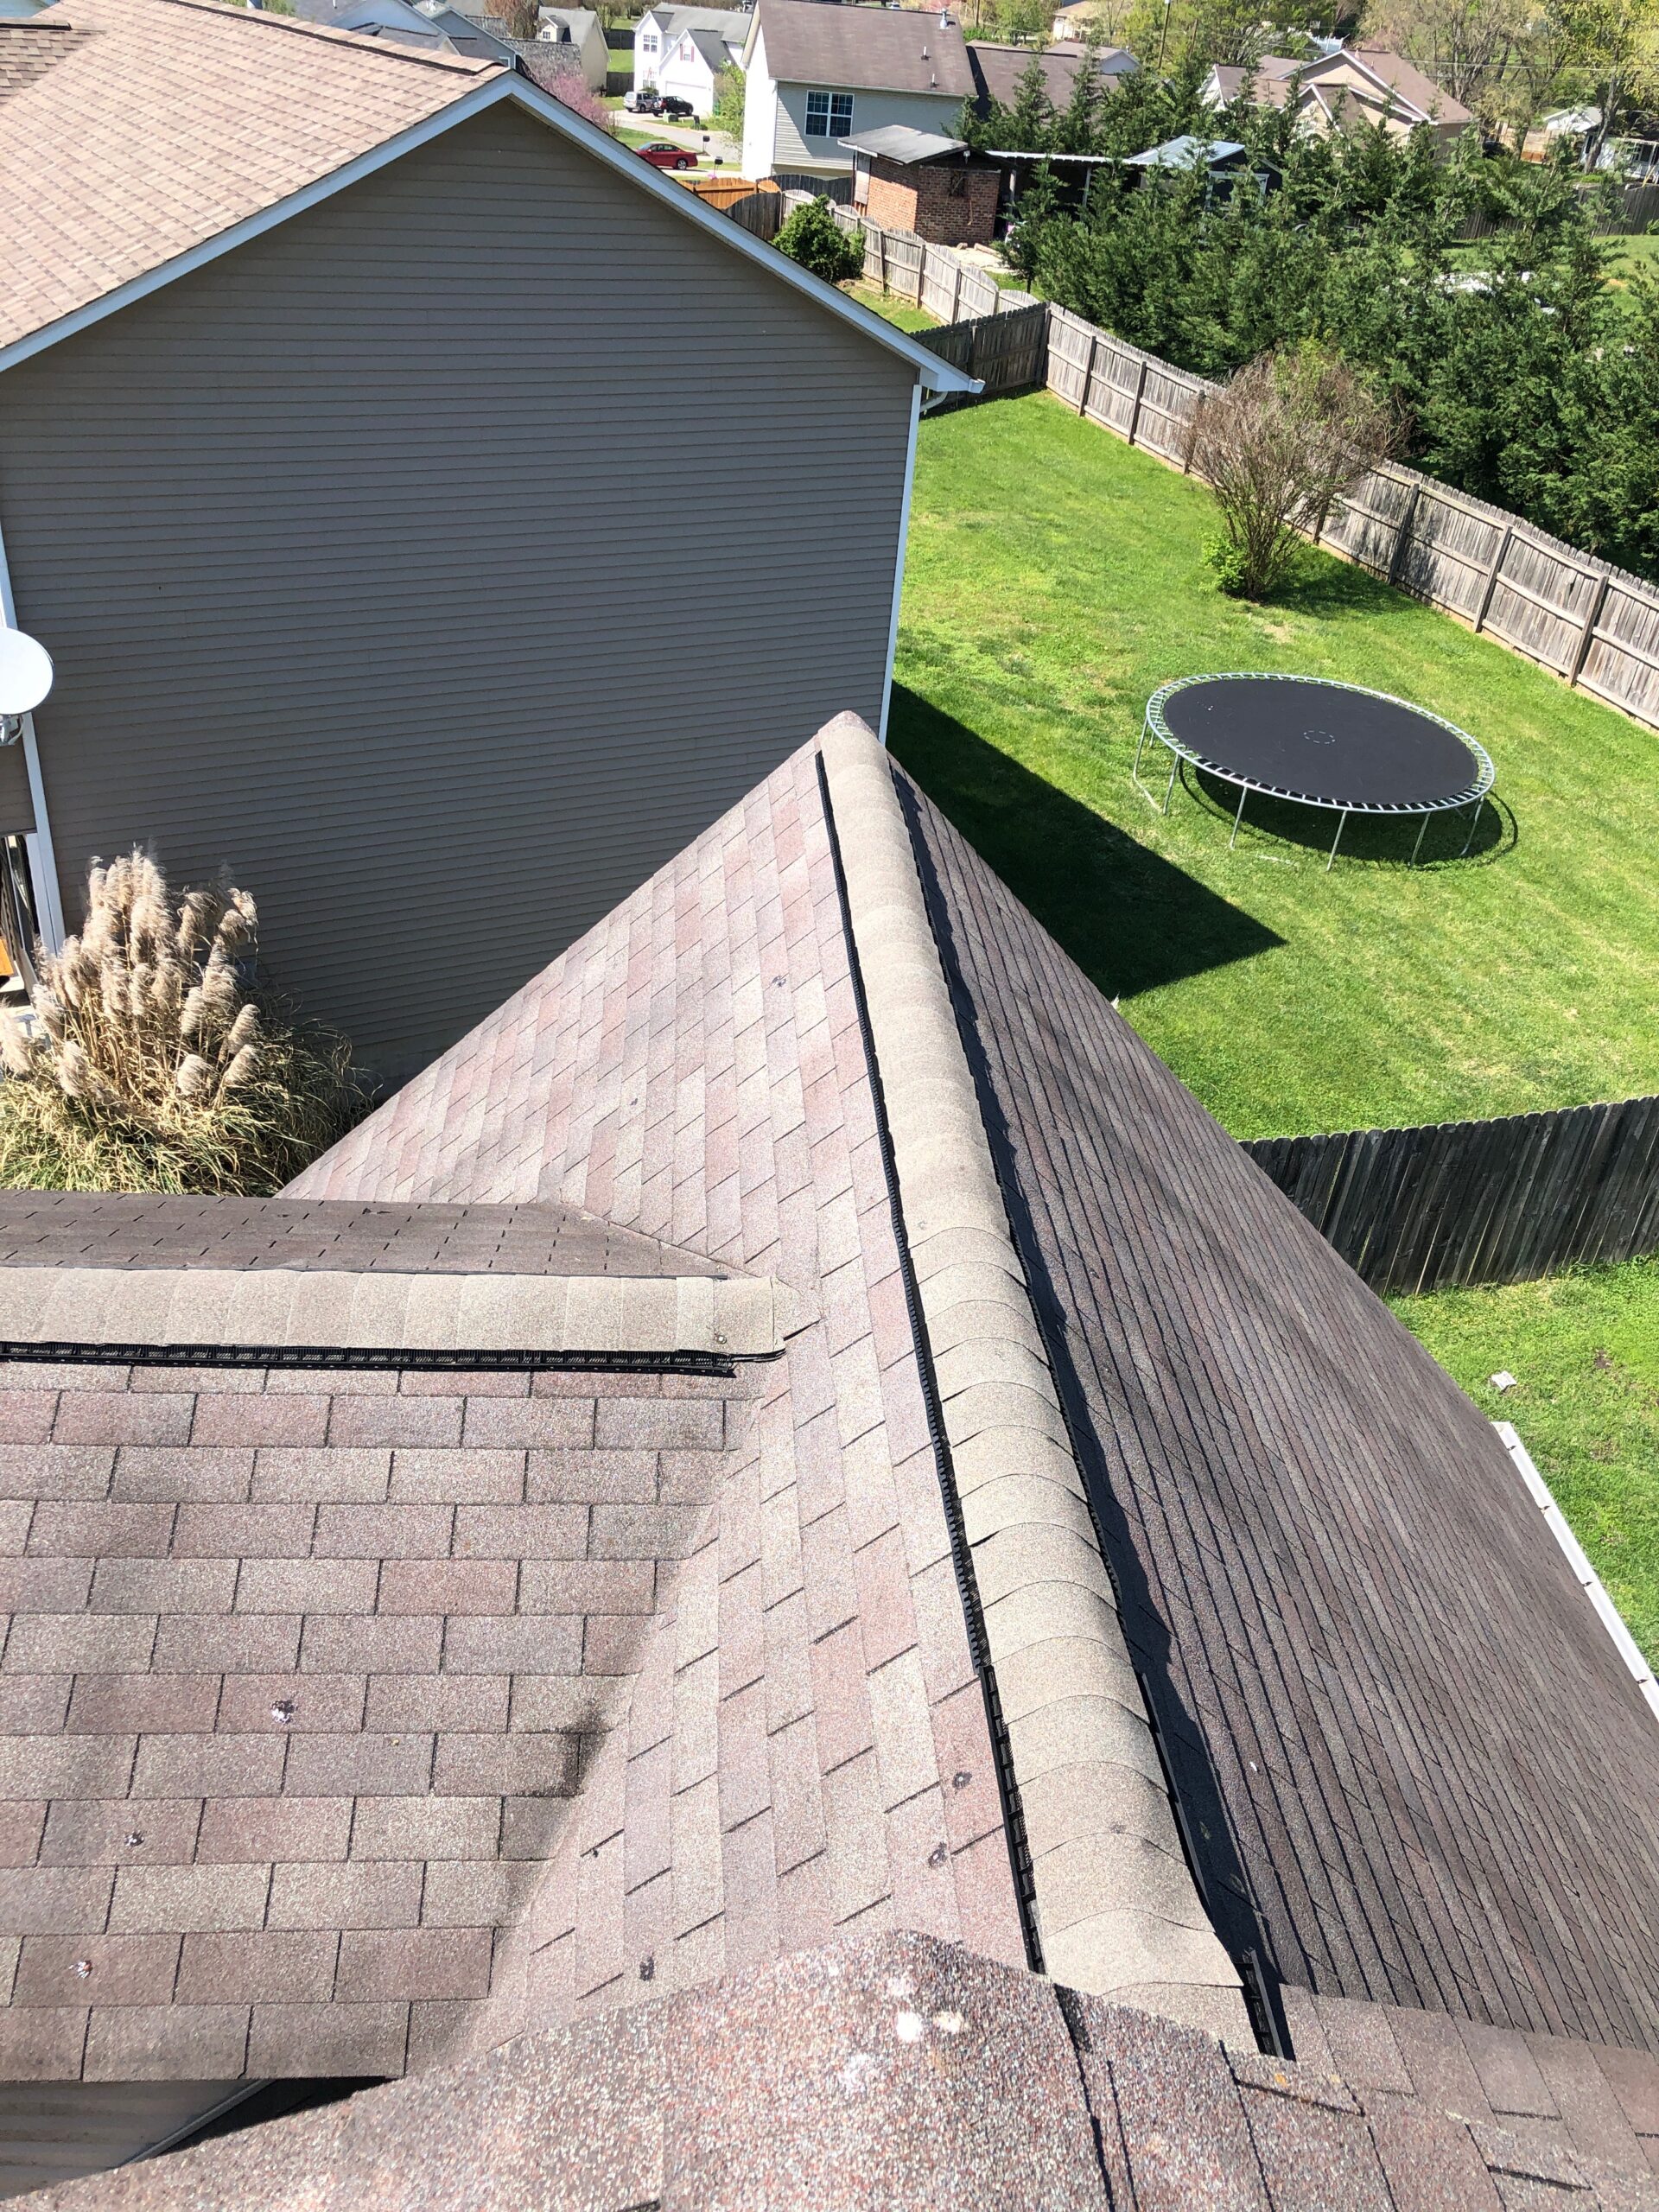 This is a picture of a ridge vent that is gray in color at the peak of the roof